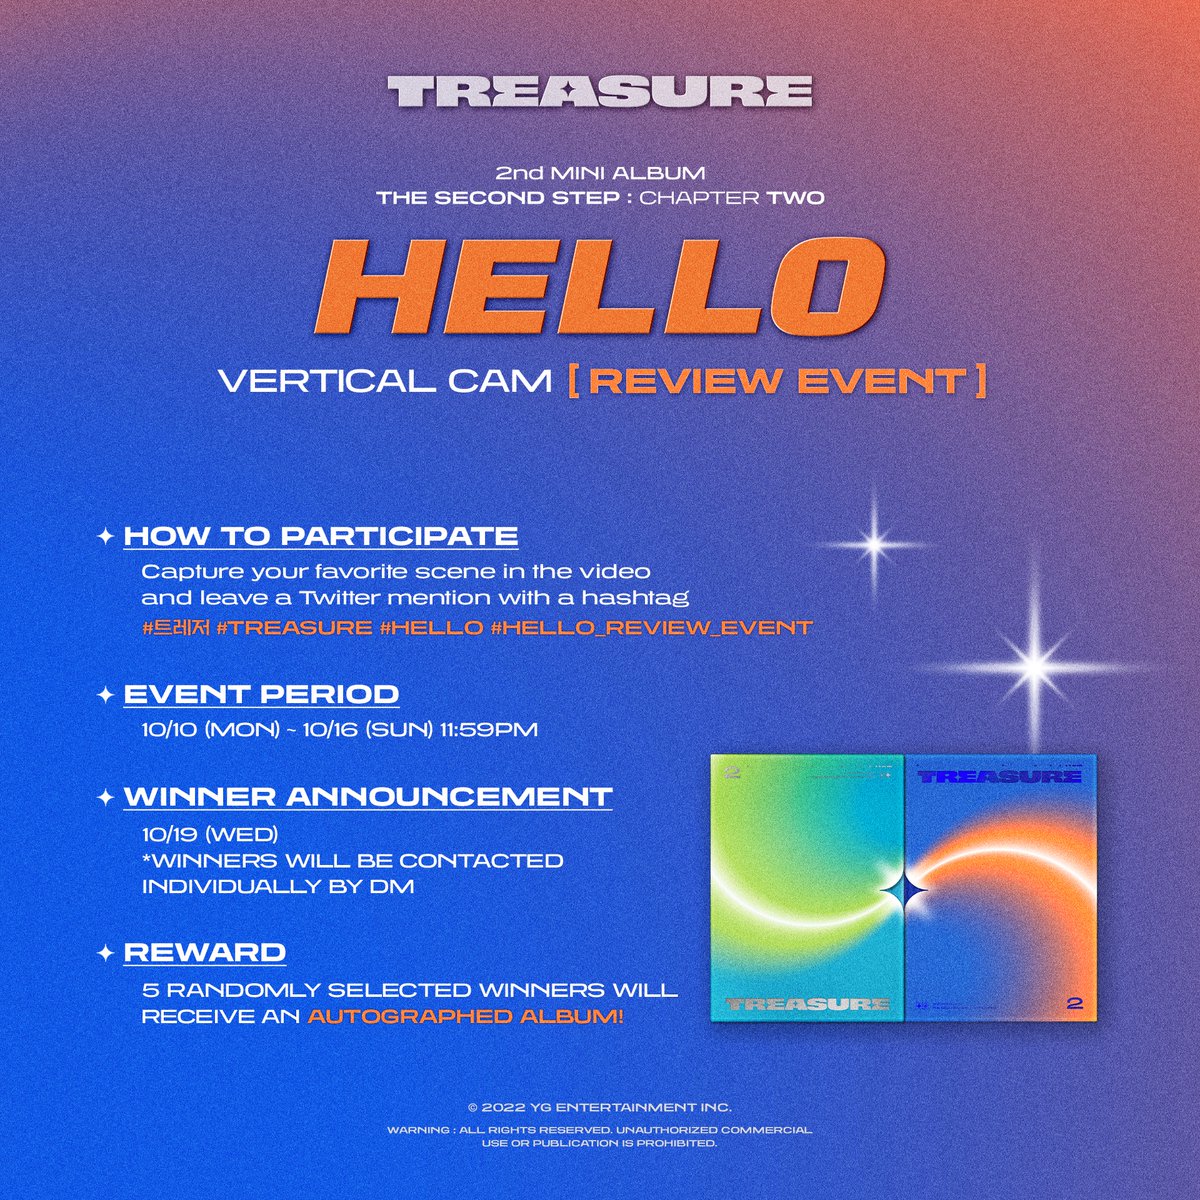 #TREASURE - ‘HELLO VERTICAL CAM’ REVIEW EVENT

▶️ VIDEO LINK
youtu.be/RMtYDvM4kNY

#트레저 #2ndMINIALBUM #THESECONDSTEP_CHAPTERTWO #HELLO #VERTICAL_CAM #HELLO_REVIEW_EVENT #HELLOeverywhere #YG